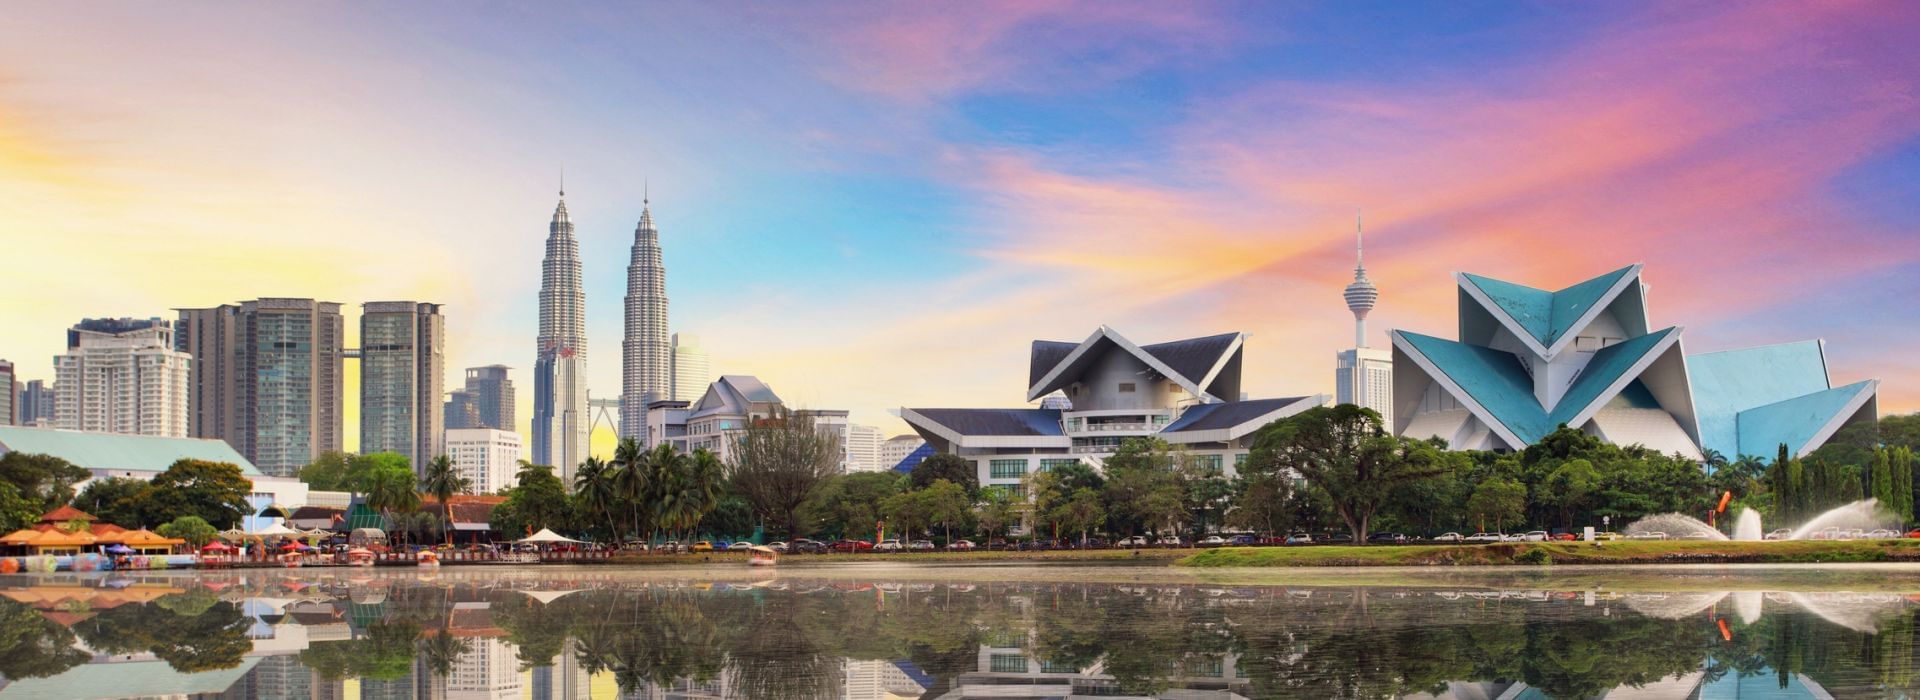 View of Kuala Lumpur attractions from Lake Gardens